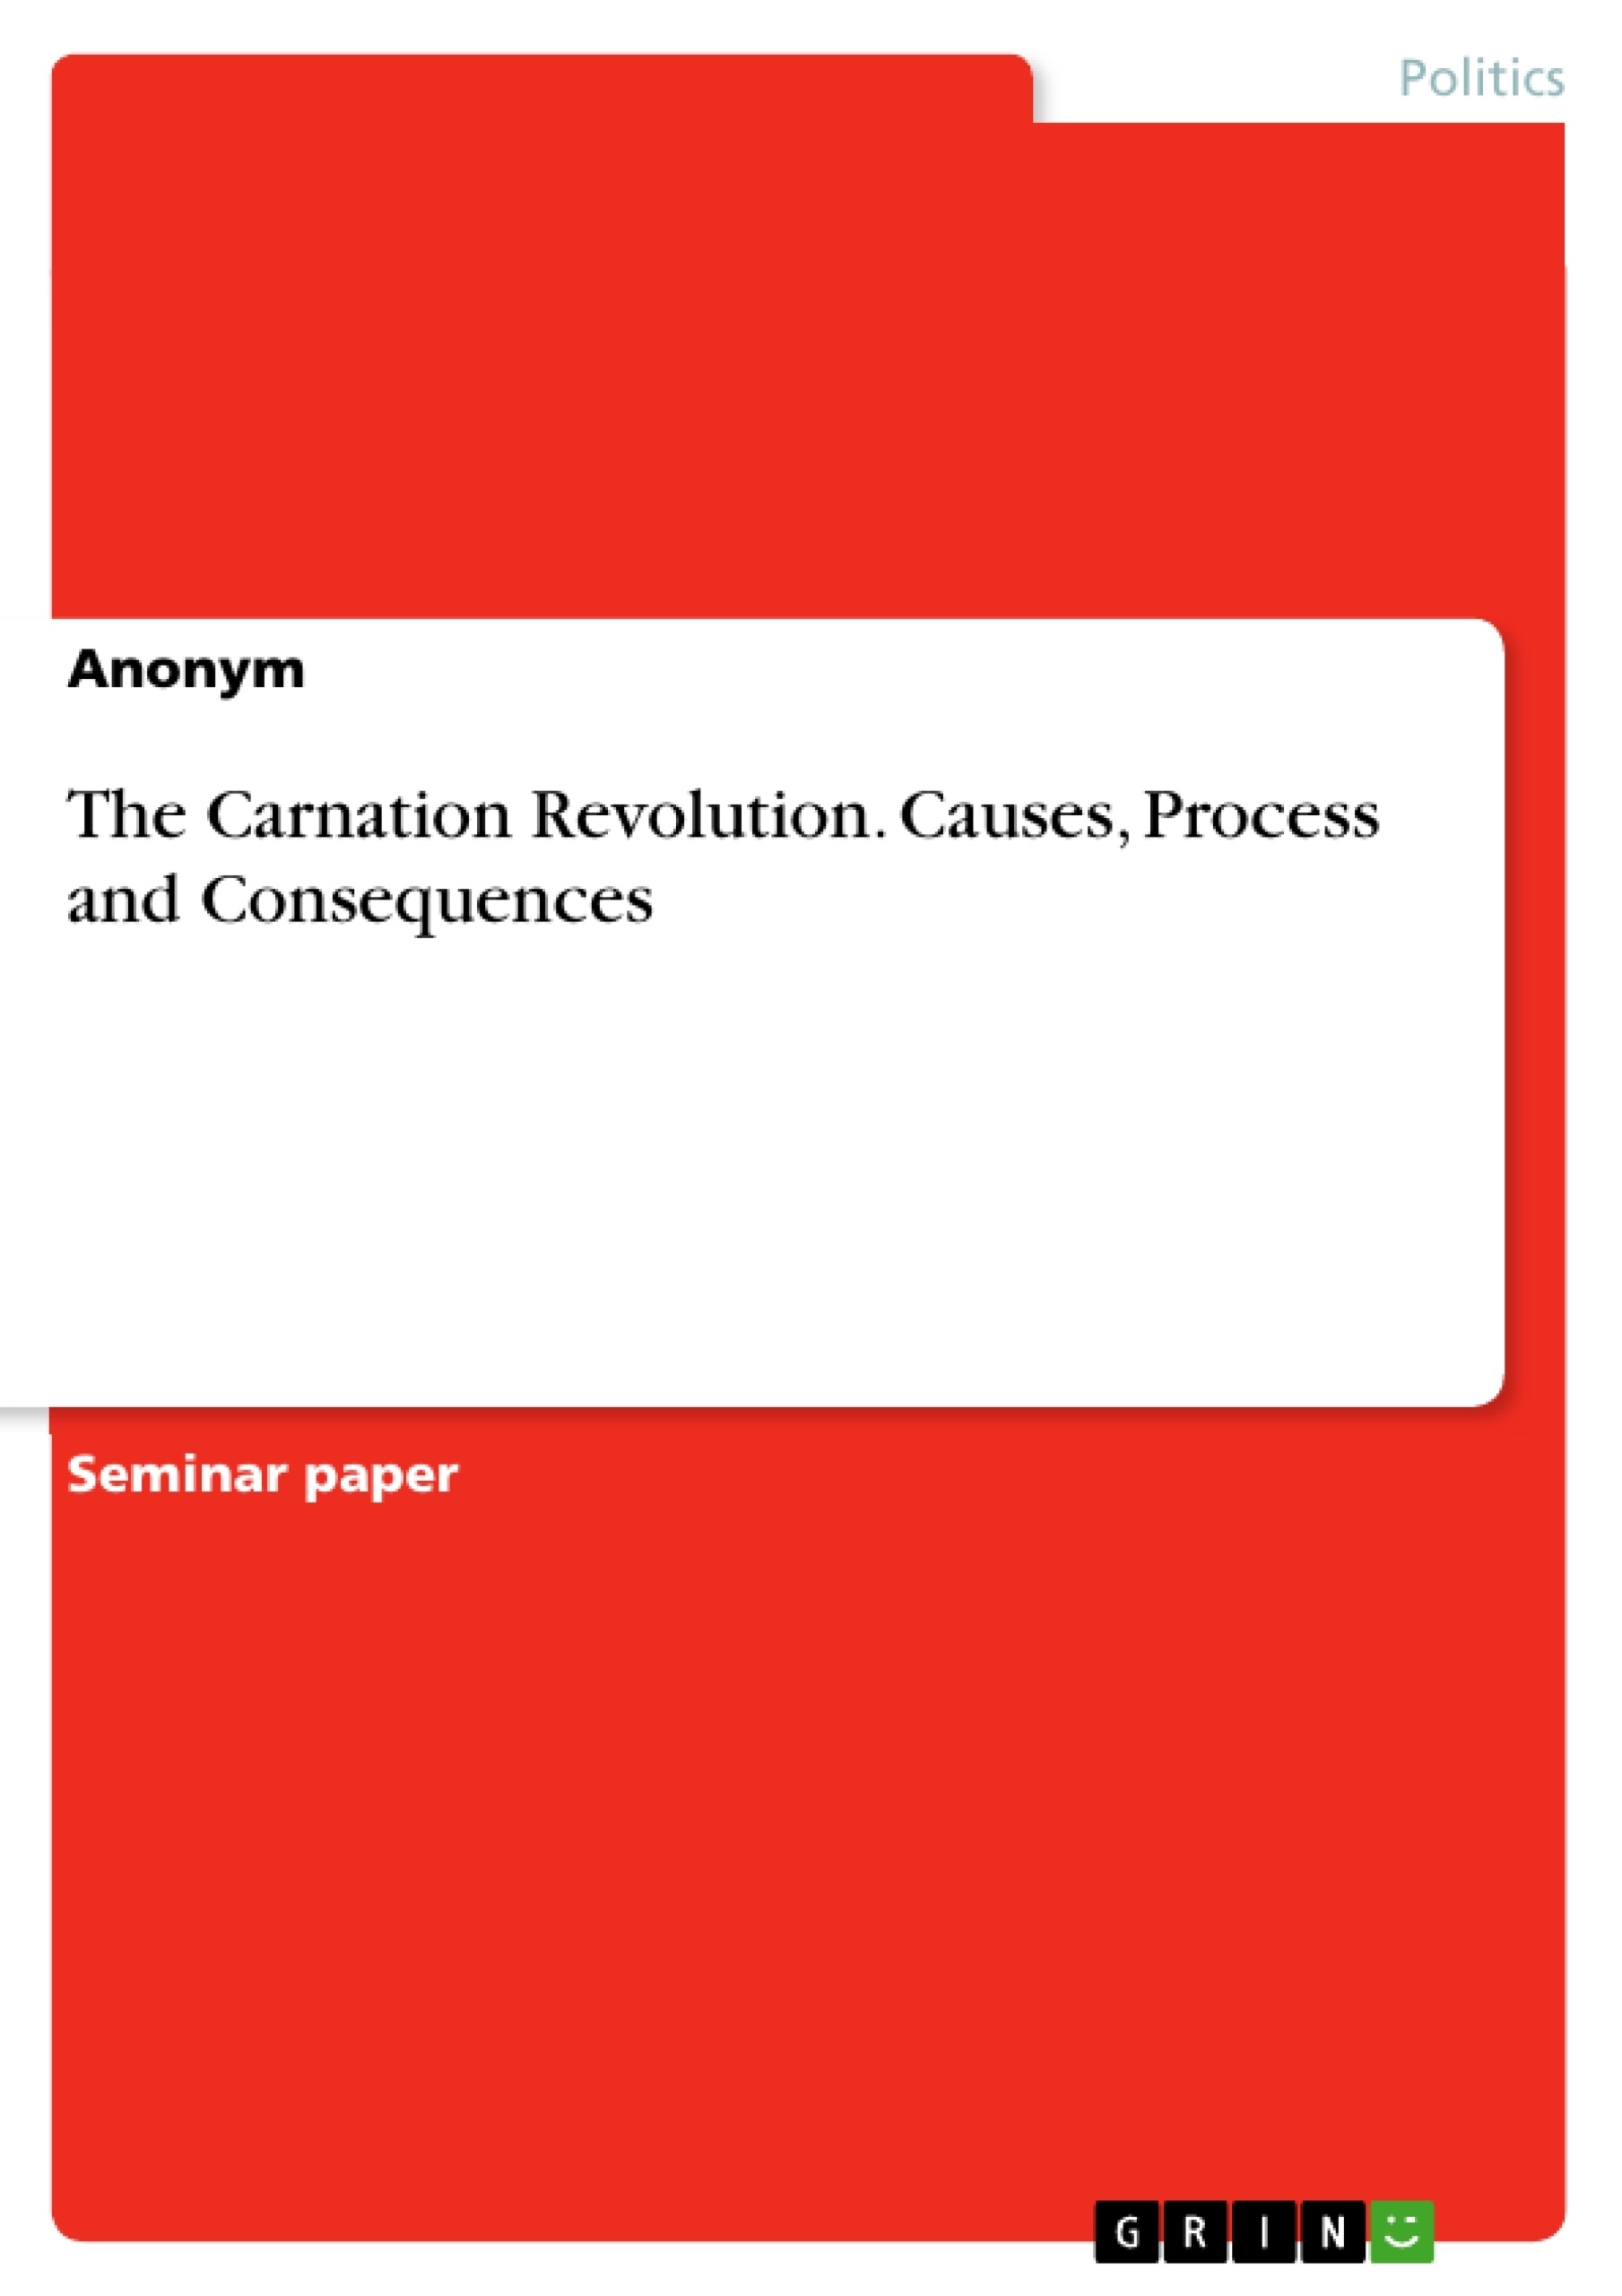 Title: The Carnation Revolution. Causes, Process and Consequences